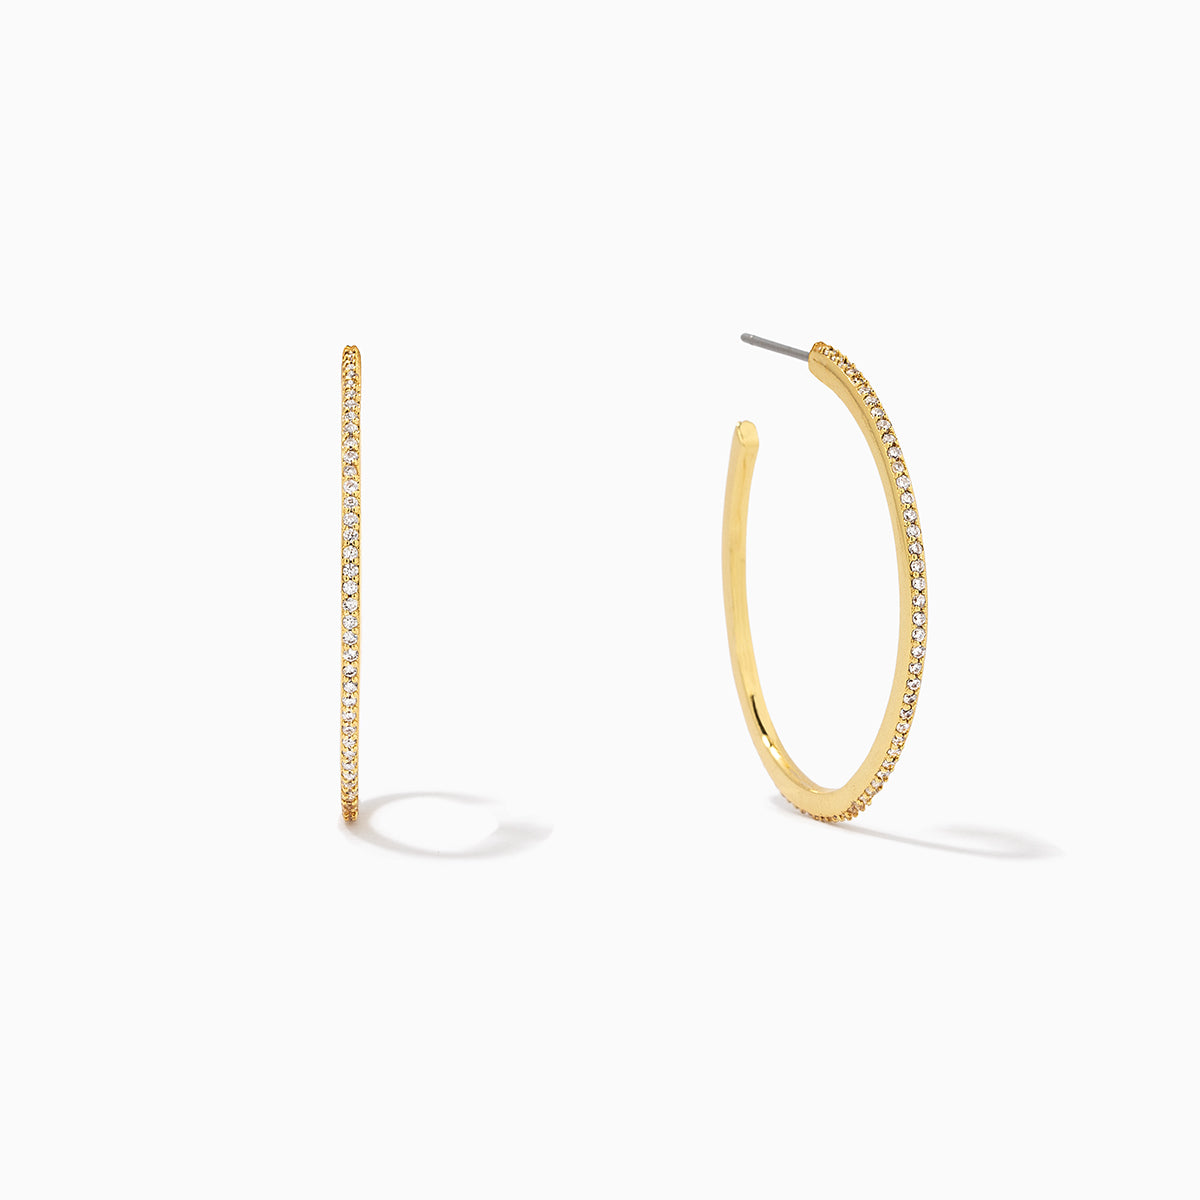 Pavé Hoop Earrings | Gold | Product Image | Uncommon James